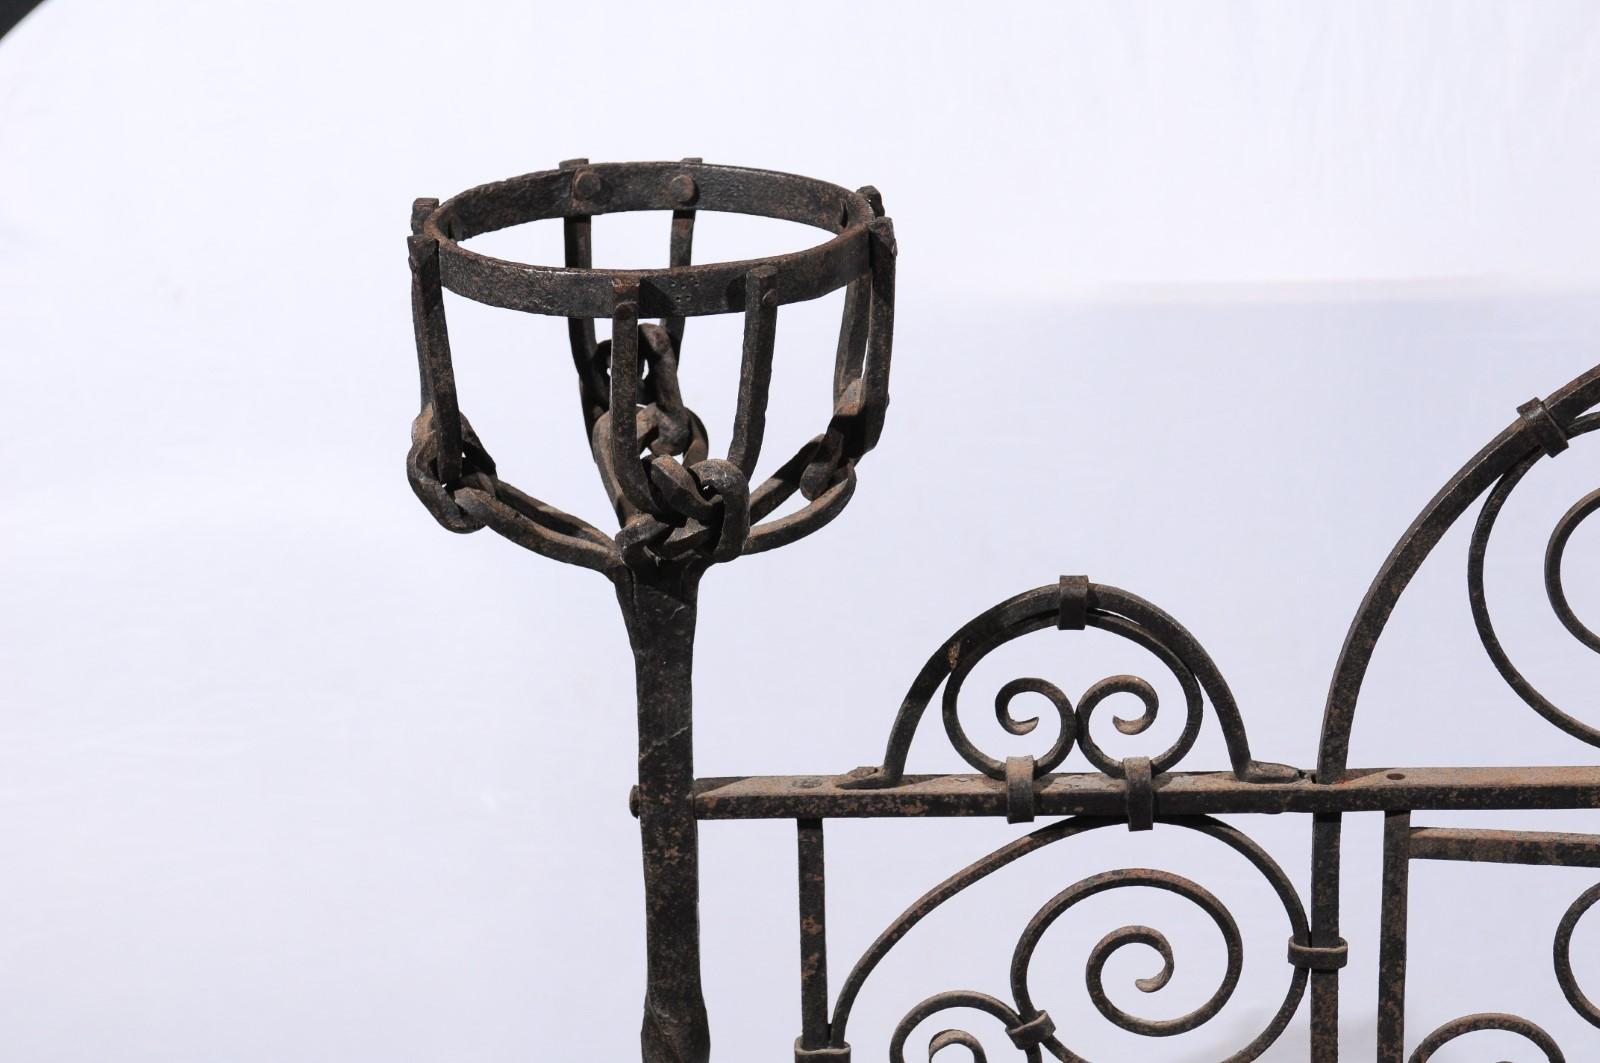 Belle Époque French Wrought Iron Freestanding Firescreen with Warming Holders, circa 1880 For Sale